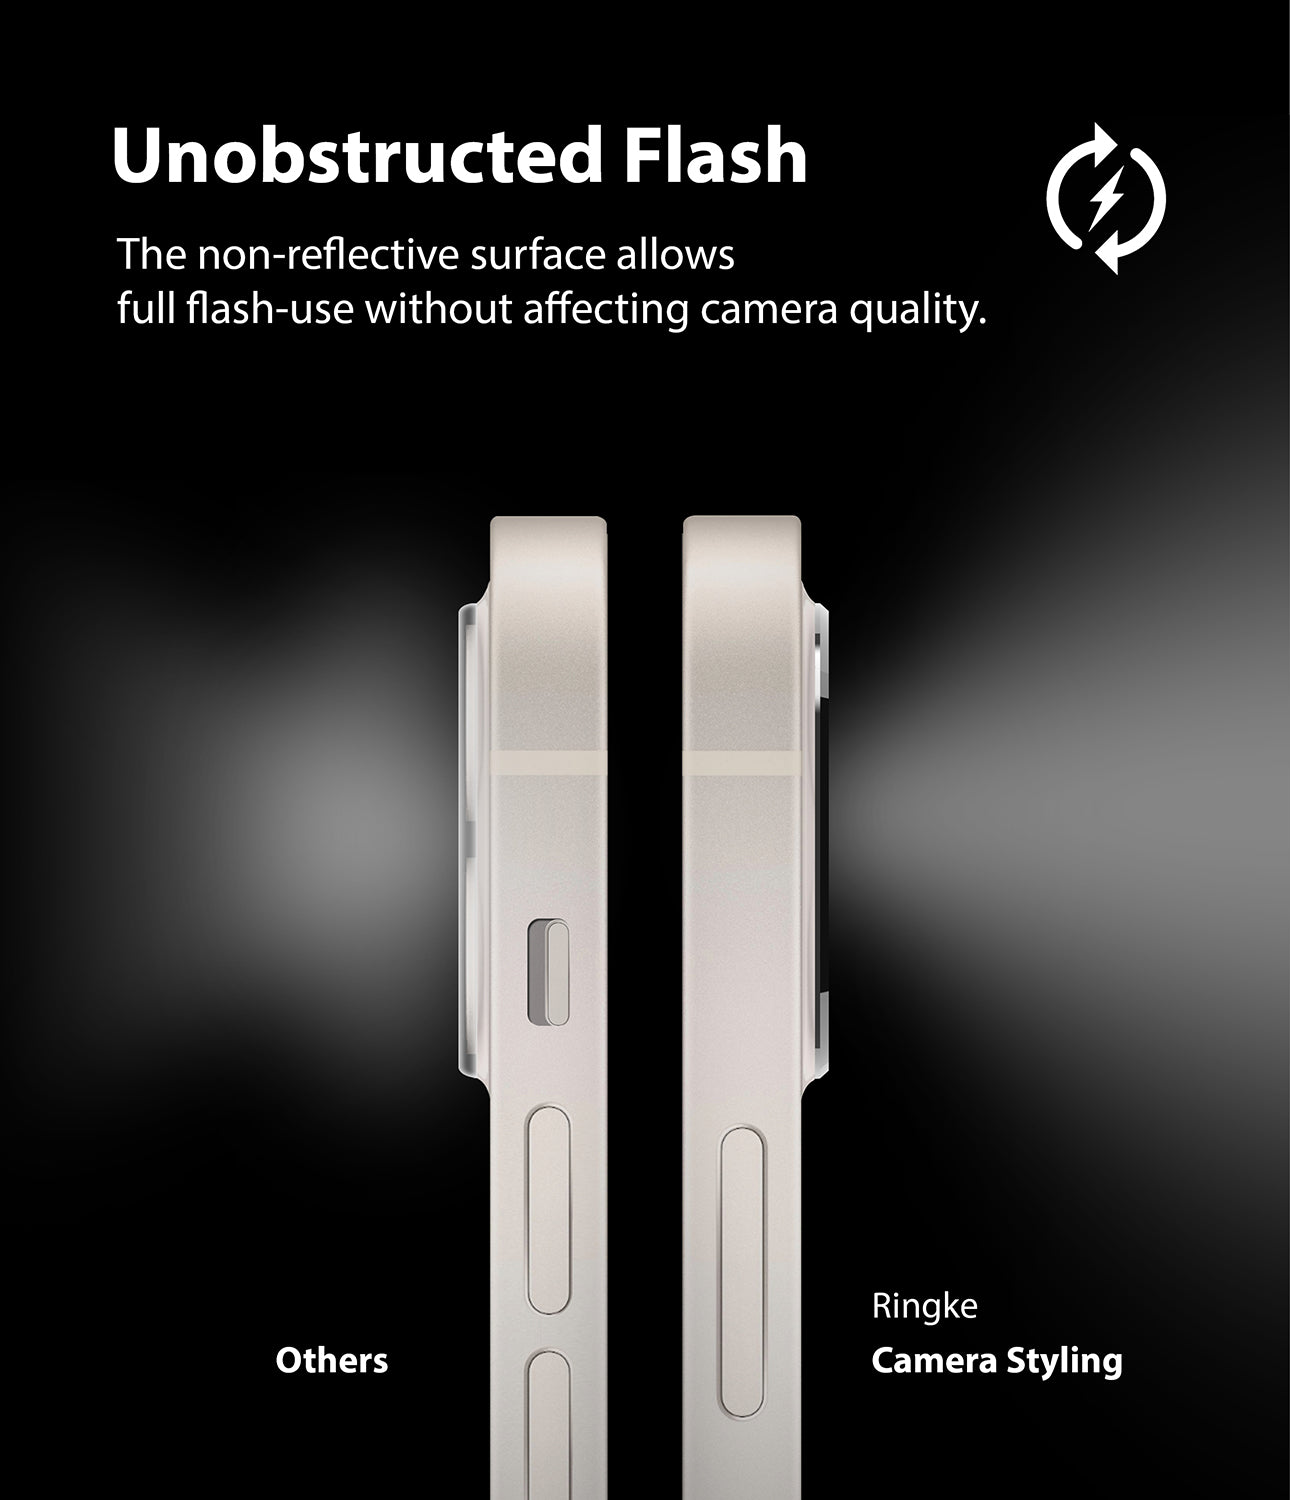 unobstructed flash - non reflective surface allows full flash use without affecting camera qualitty